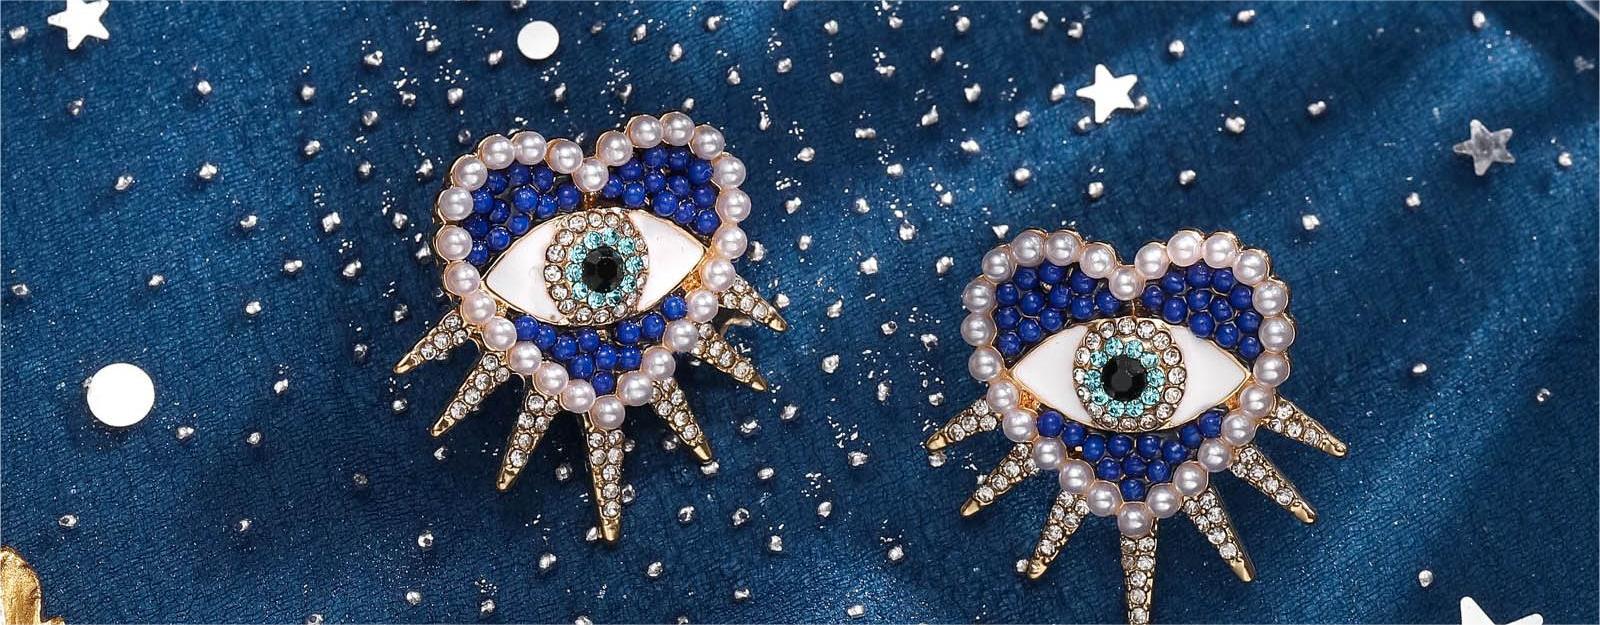 Warding Off Negativity: The Fascinating History and Symbolism of Evil Eye Jewelry